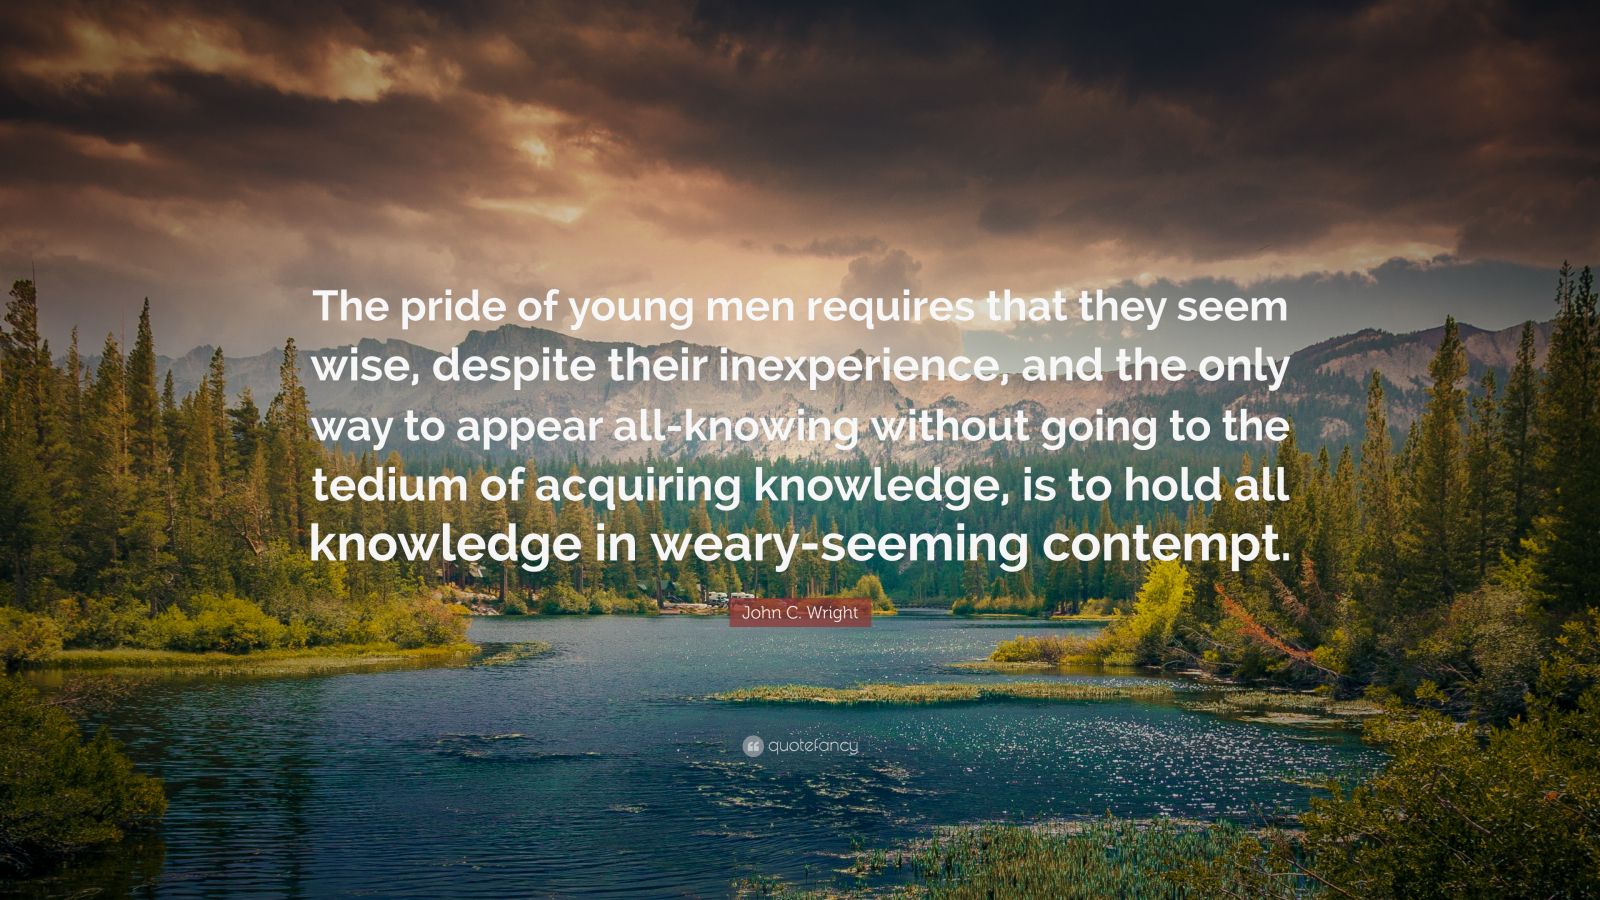 John C. Wright Quote: “The pride of young men requires that they seem ...